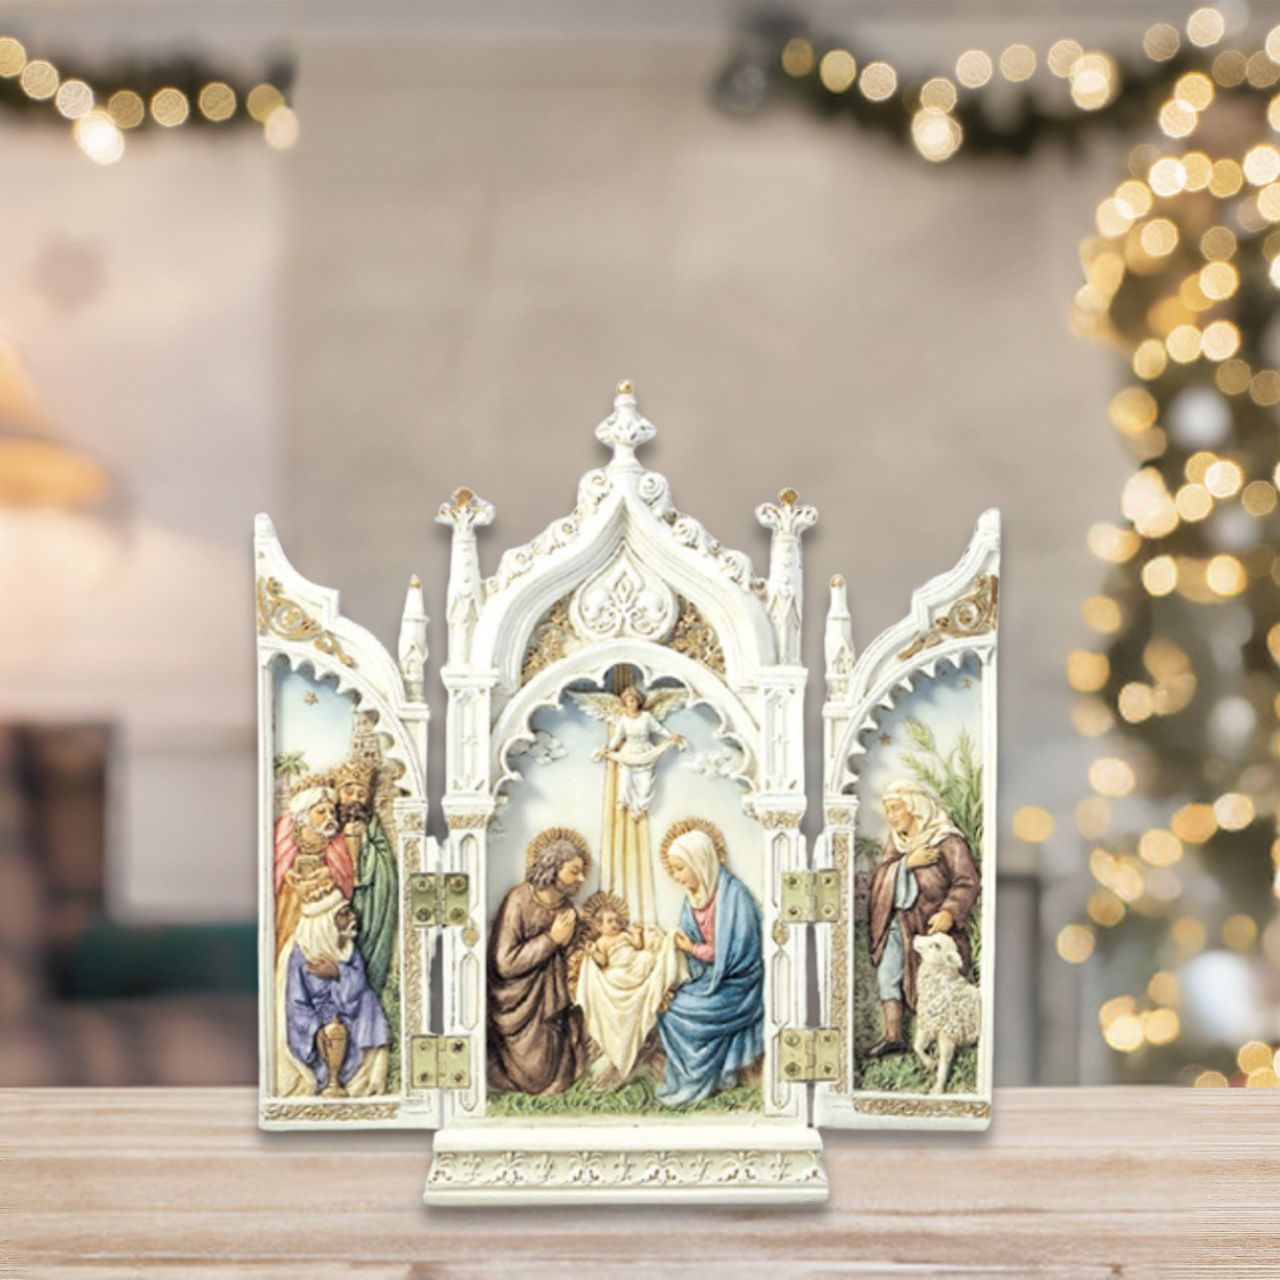 CBC Veronese Resin Statue 8 inch Nativity Triptych  This stunning Veronese Resin Statue 8 inch Nativity Triptych is the perfect addition to your holiday decor. Featuring amazing attention to detail, this statue is crafted with durable resin for years of enjoyment. Highly collectible, it makes a great gift as well.